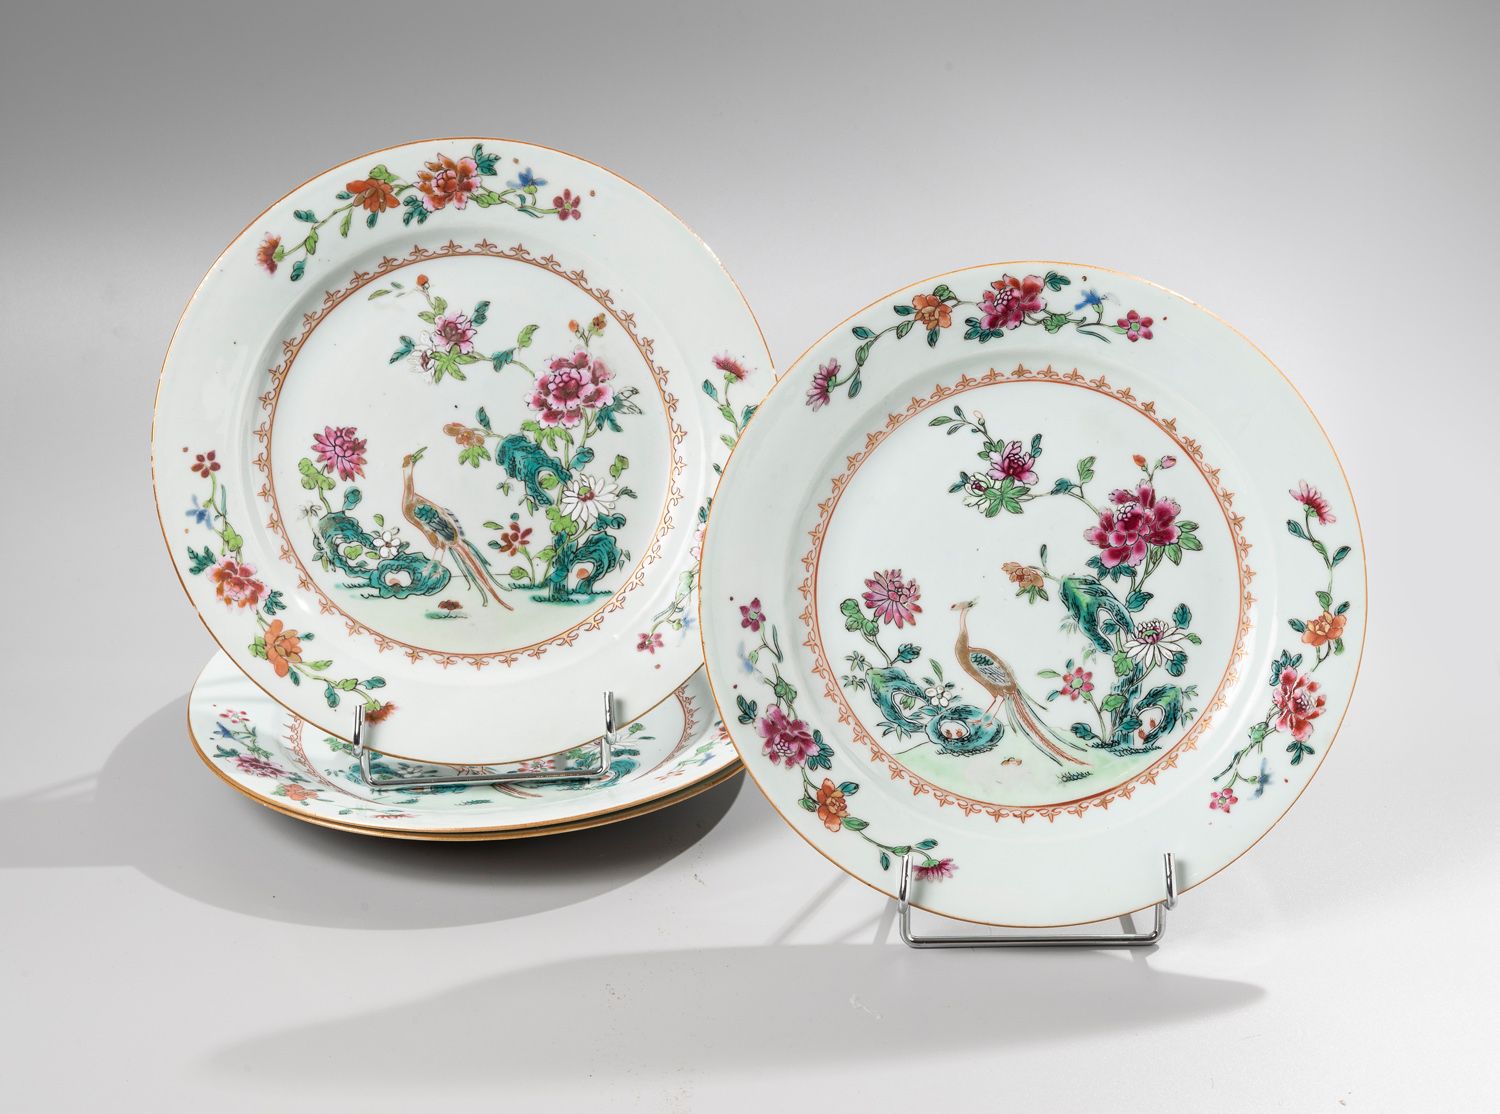 Null CHINA, India Company, 18th century

Set of 6 porcelain and enamel plates of&hellip;